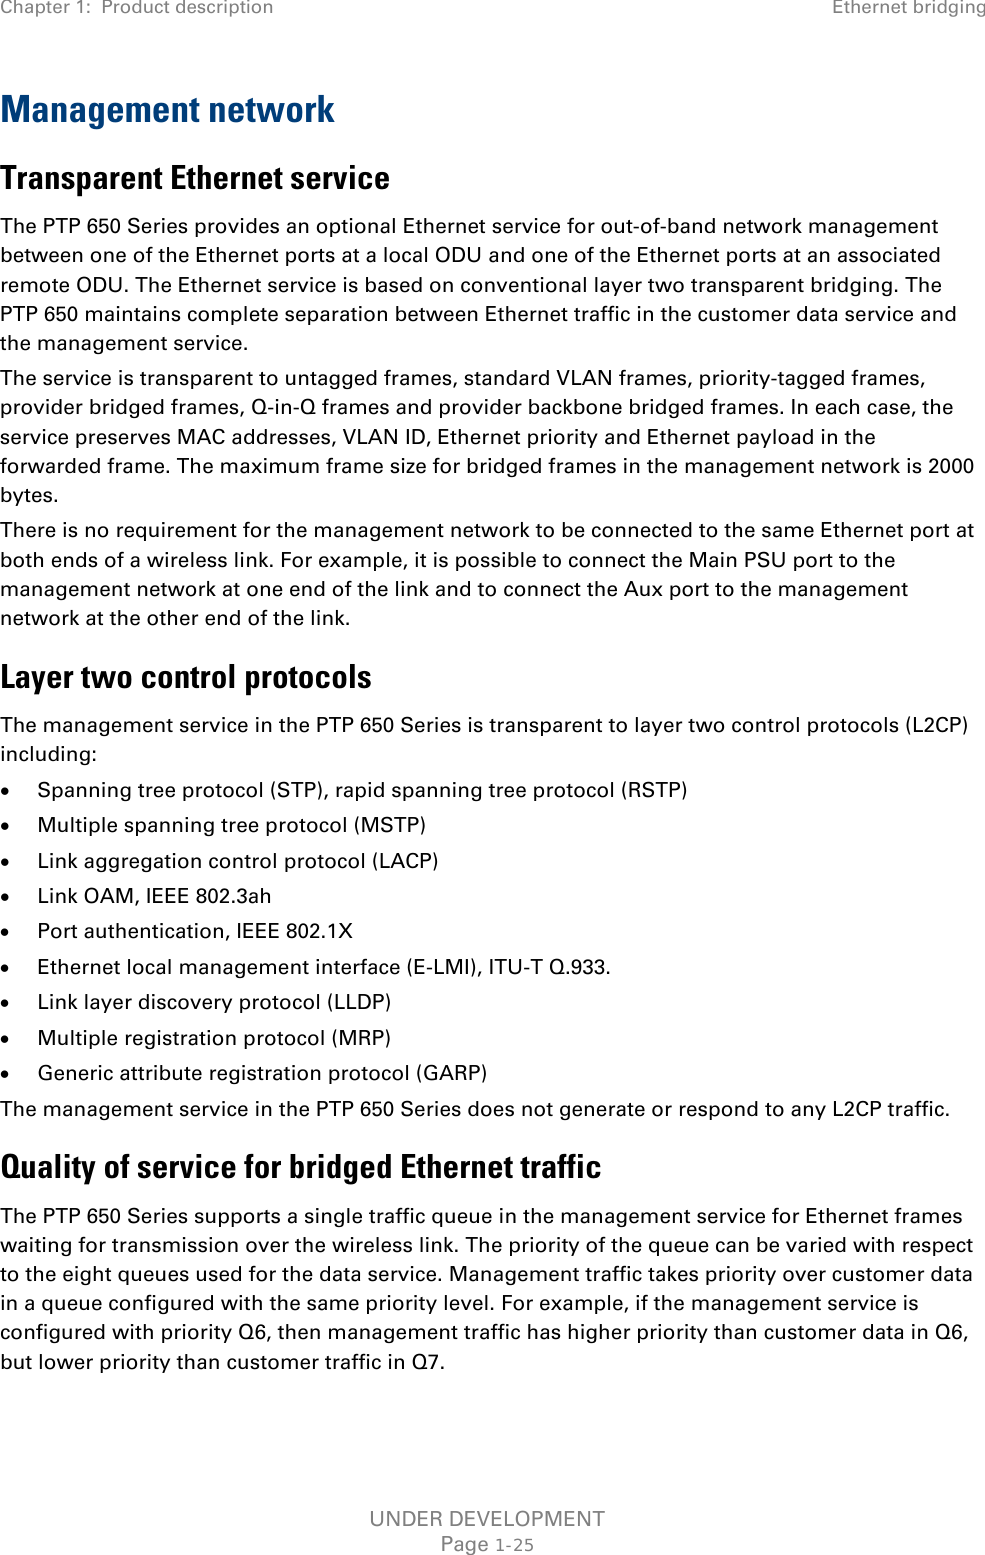 Chapter 1:  Product description Ethernet bridging  Management network Transparent Ethernet service The PTP 650 Series provides an optional Ethernet service for out-of-band network management between one of the Ethernet ports at a local ODU and one of the Ethernet ports at an associated remote ODU. The Ethernet service is based on conventional layer two transparent bridging. The PTP 650 maintains complete separation between Ethernet traffic in the customer data service and the management service. The service is transparent to untagged frames, standard VLAN frames, priority-tagged frames, provider bridged frames, Q-in-Q frames and provider backbone bridged frames. In each case, the service preserves MAC addresses, VLAN ID, Ethernet priority and Ethernet payload in the forwarded frame. The maximum frame size for bridged frames in the management network is 2000 bytes. There is no requirement for the management network to be connected to the same Ethernet port at both ends of a wireless link. For example, it is possible to connect the Main PSU port to the management network at one end of the link and to connect the Aux port to the management network at the other end of the link. Layer two control protocols The management service in the PTP 650 Series is transparent to layer two control protocols (L2CP) including: • Spanning tree protocol (STP), rapid spanning tree protocol (RSTP) • Multiple spanning tree protocol (MSTP) • Link aggregation control protocol (LACP) • Link OAM, IEEE 802.3ah • Port authentication, IEEE 802.1X • Ethernet local management interface (E-LMI), ITU-T Q.933. • Link layer discovery protocol (LLDP) • Multiple registration protocol (MRP) • Generic attribute registration protocol (GARP) The management service in the PTP 650 Series does not generate or respond to any L2CP traffic. Quality of service for bridged Ethernet traffic The PTP 650 Series supports a single traffic queue in the management service for Ethernet frames waiting for transmission over the wireless link. The priority of the queue can be varied with respect to the eight queues used for the data service. Management traffic takes priority over customer data in a queue configured with the same priority level. For example, if the management service is configured with priority Q6, then management traffic has higher priority than customer data in Q6, but lower priority than customer traffic in Q7. UNDER DEVELOPMENT Page 1-25 